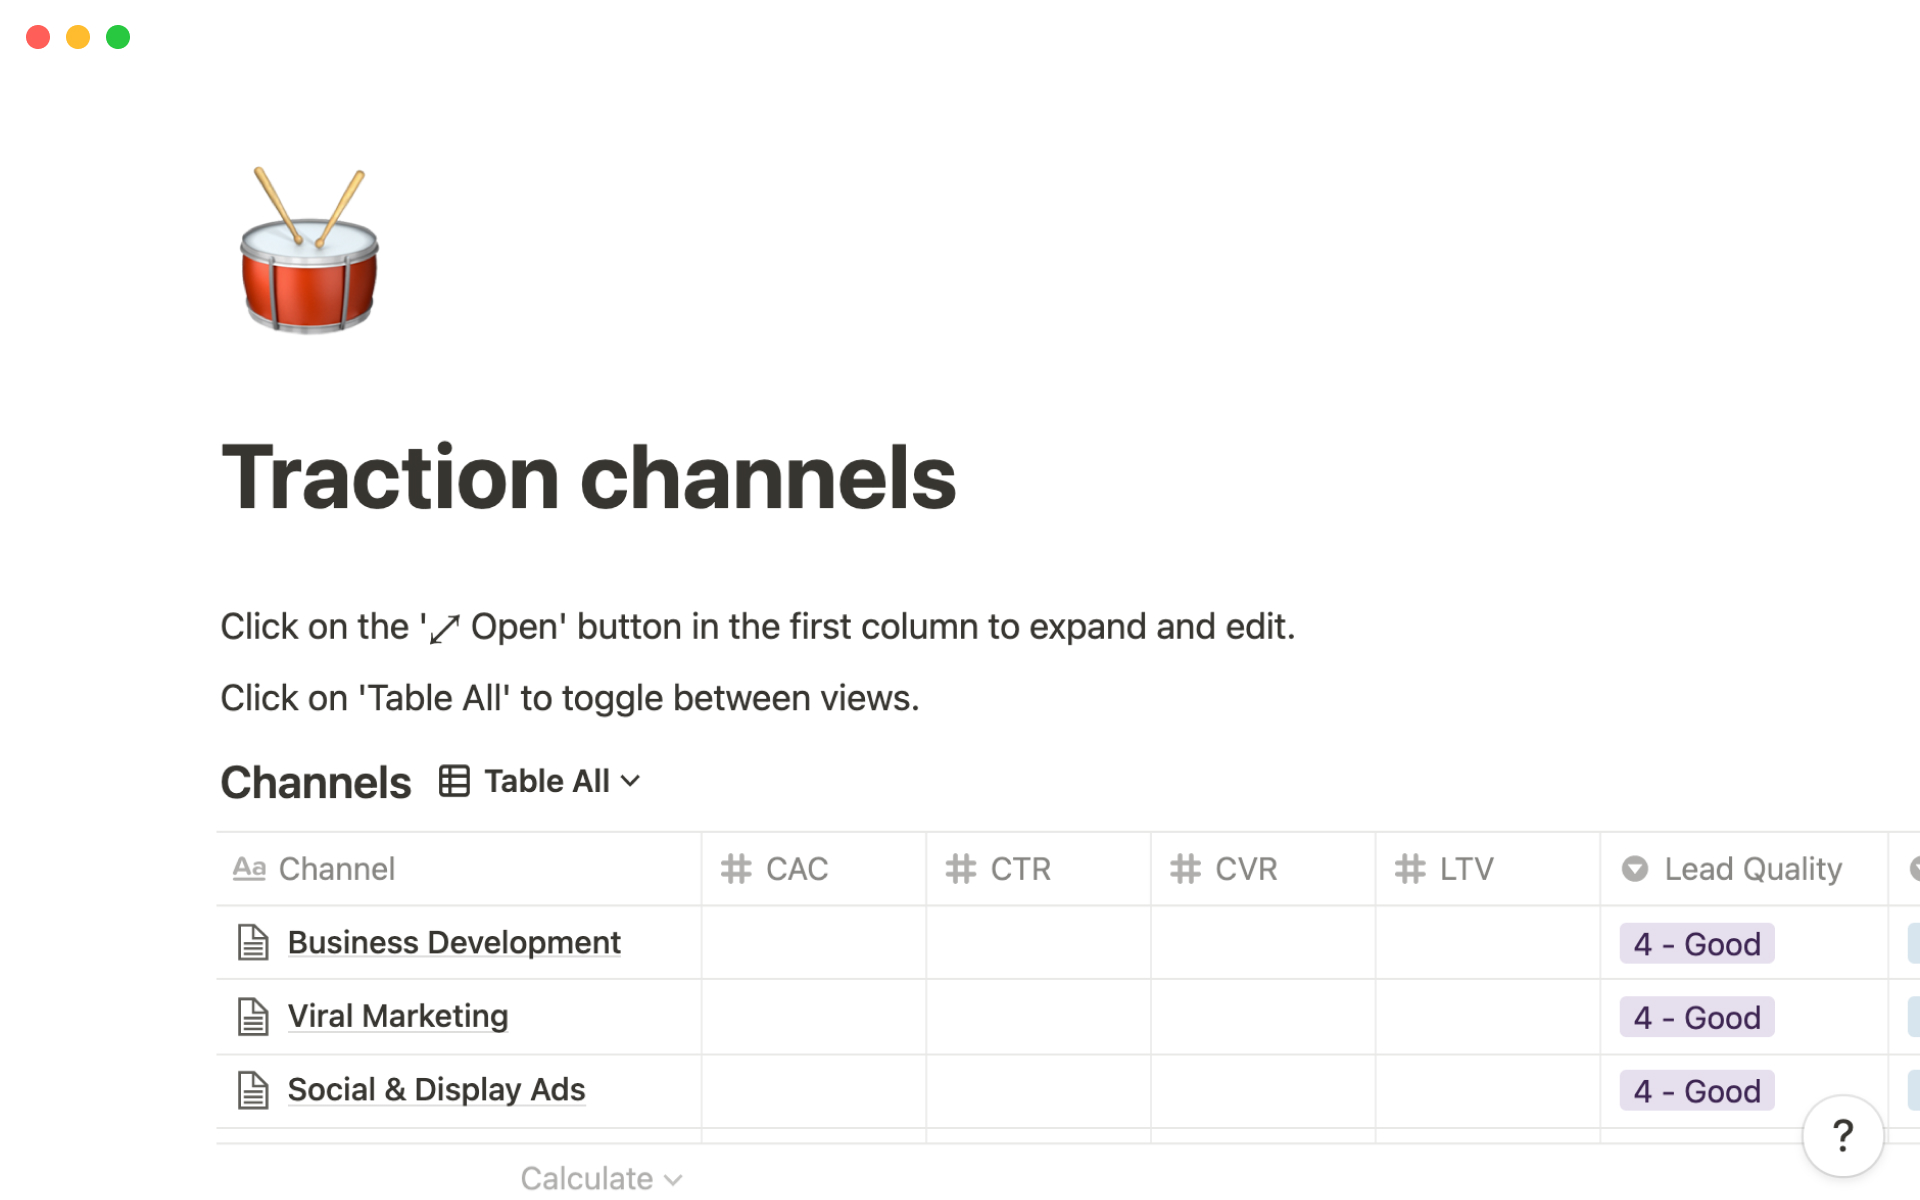 The desktop image for the Traction channels template